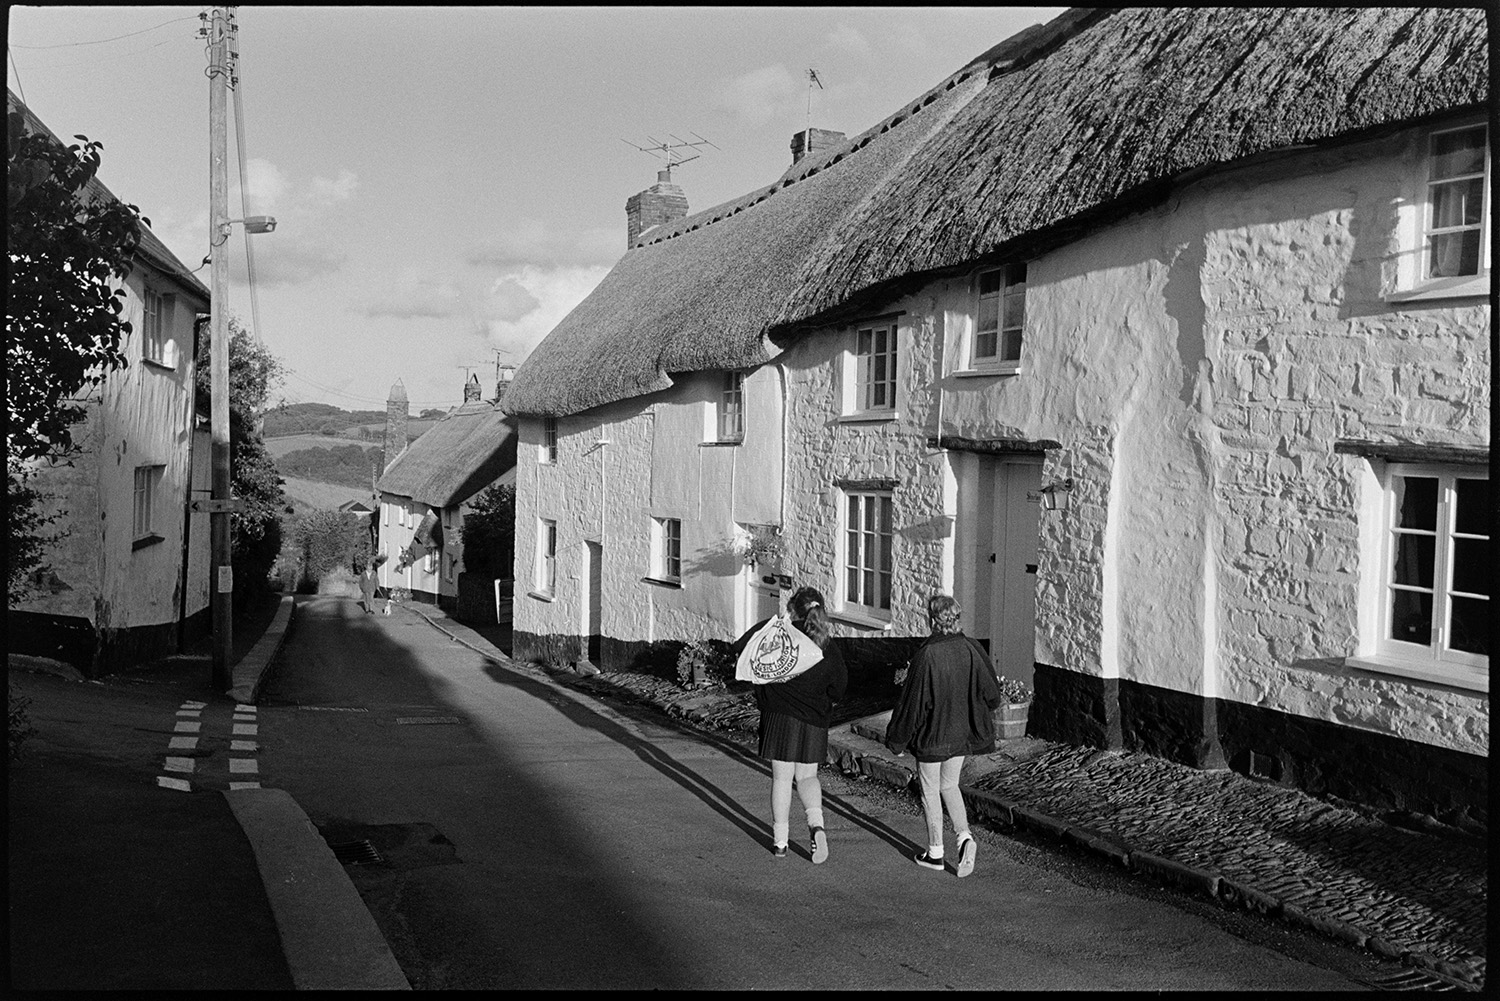 Street scenes, cottages, pub and chemist, mothers and children. 
[Two children walking down a street in Chulmleigh, past thatched cottages. A man and dog are walking up the street towards them.]